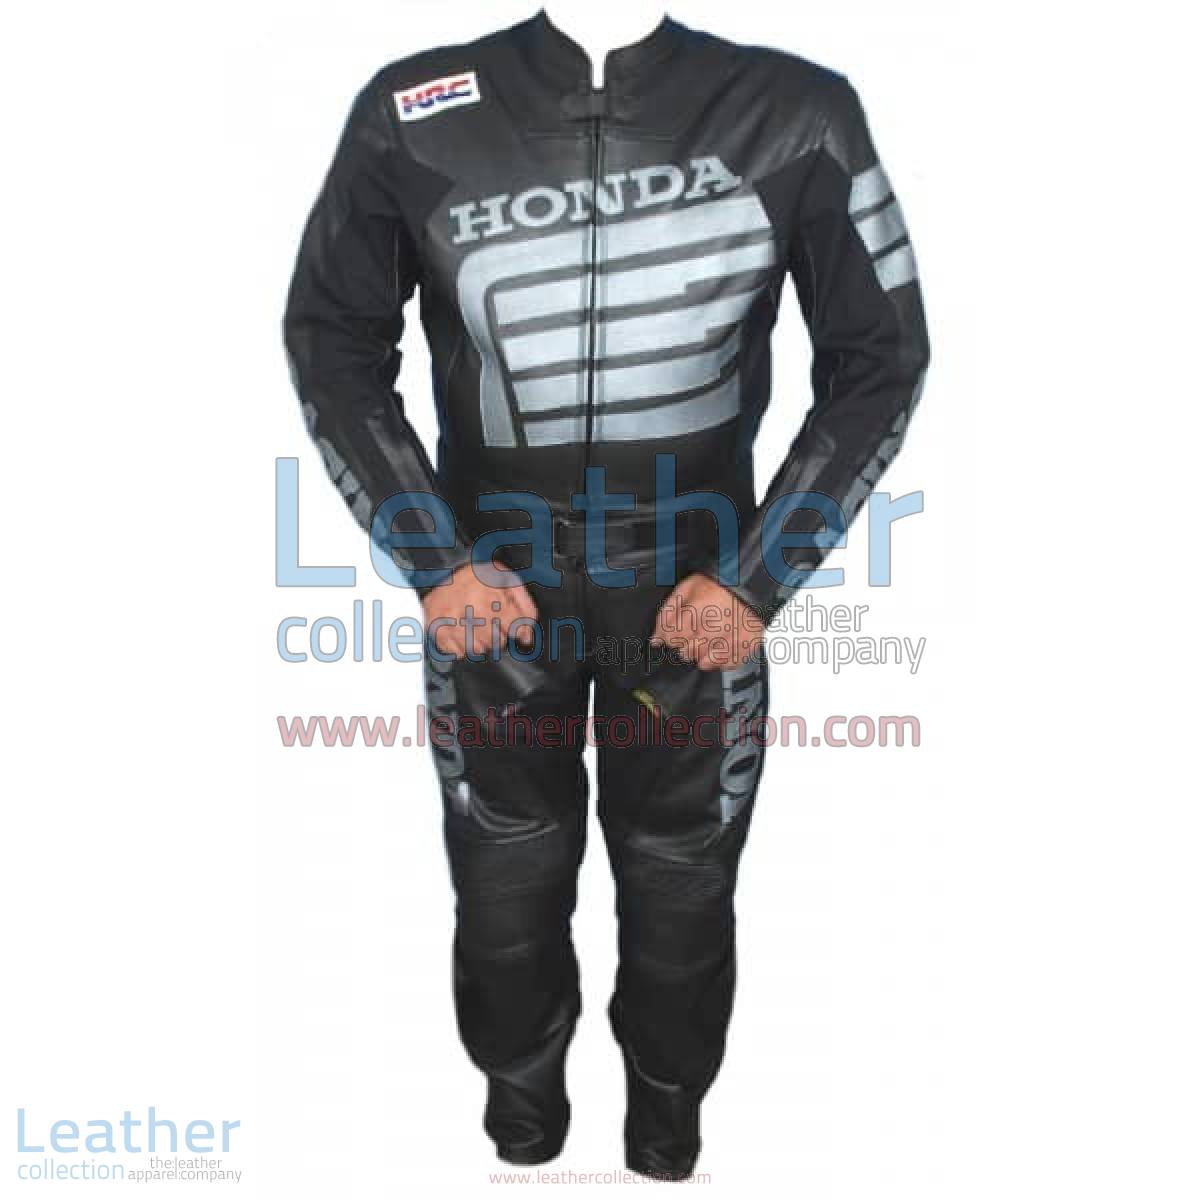 Honda Motorcycle Leather Suit